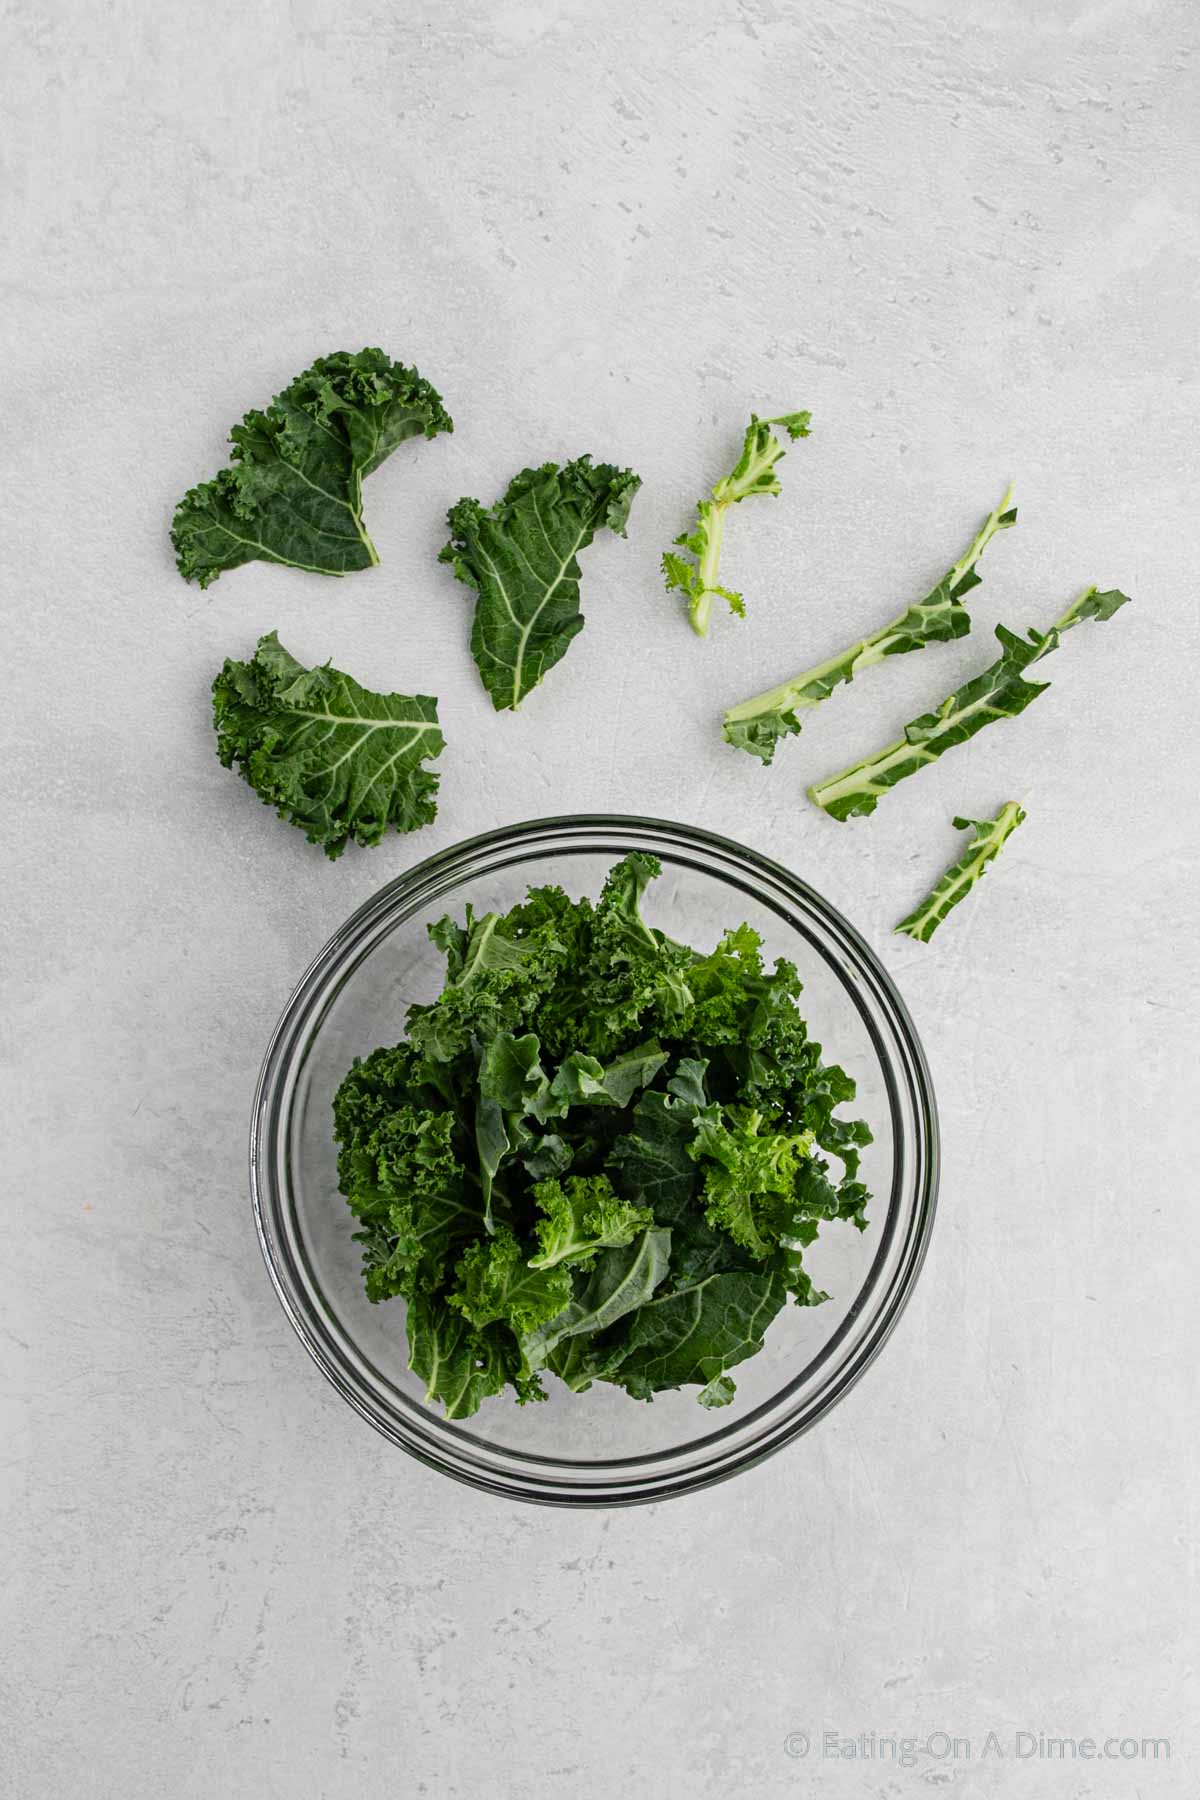 Cut the kale into bite size pieces and removing the stems